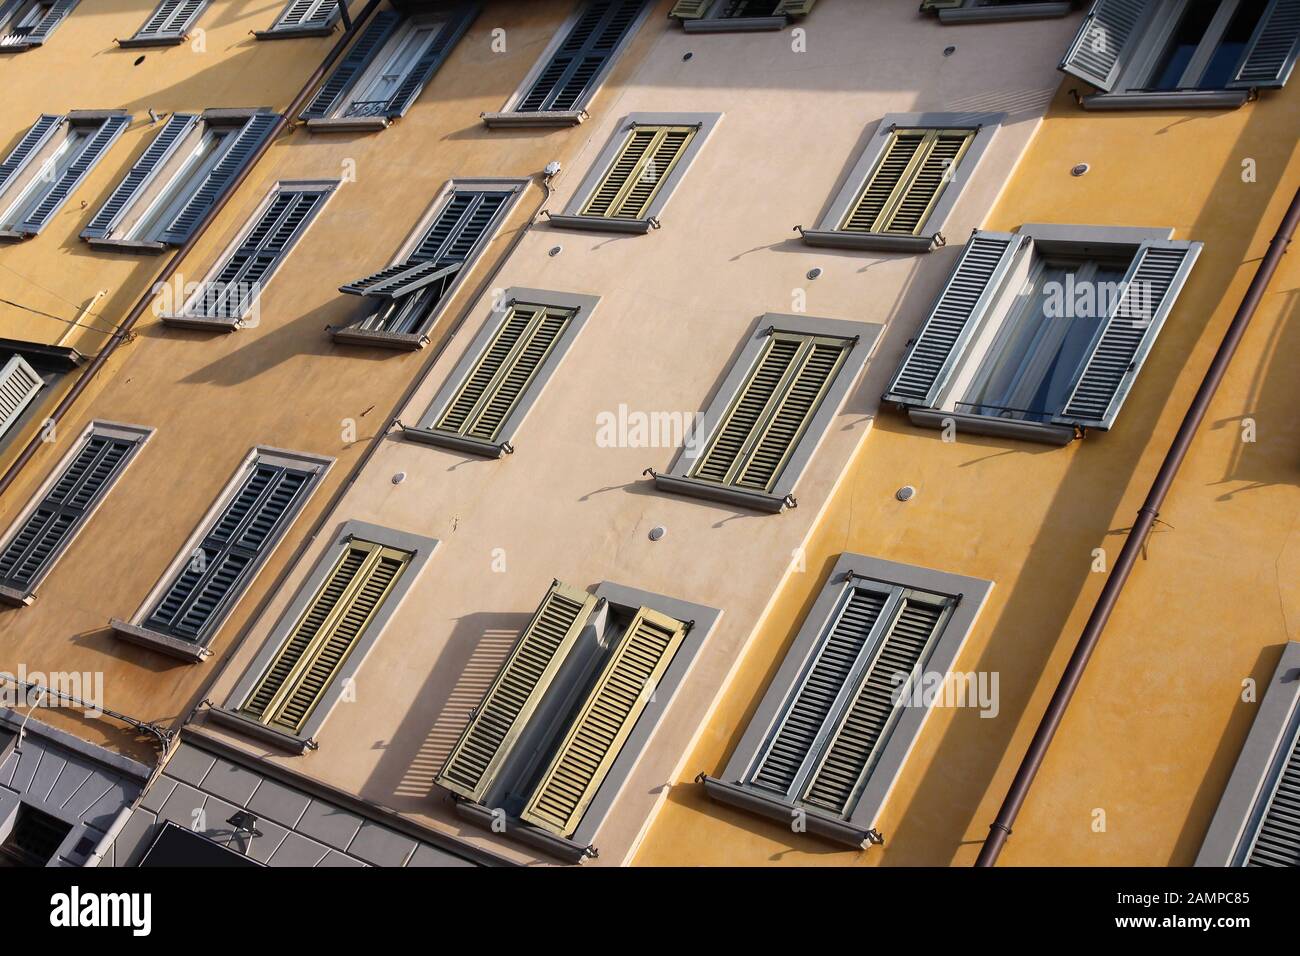 Bergamo in Lombardy, Italy - old residential architecture abstract view. Stock Photo